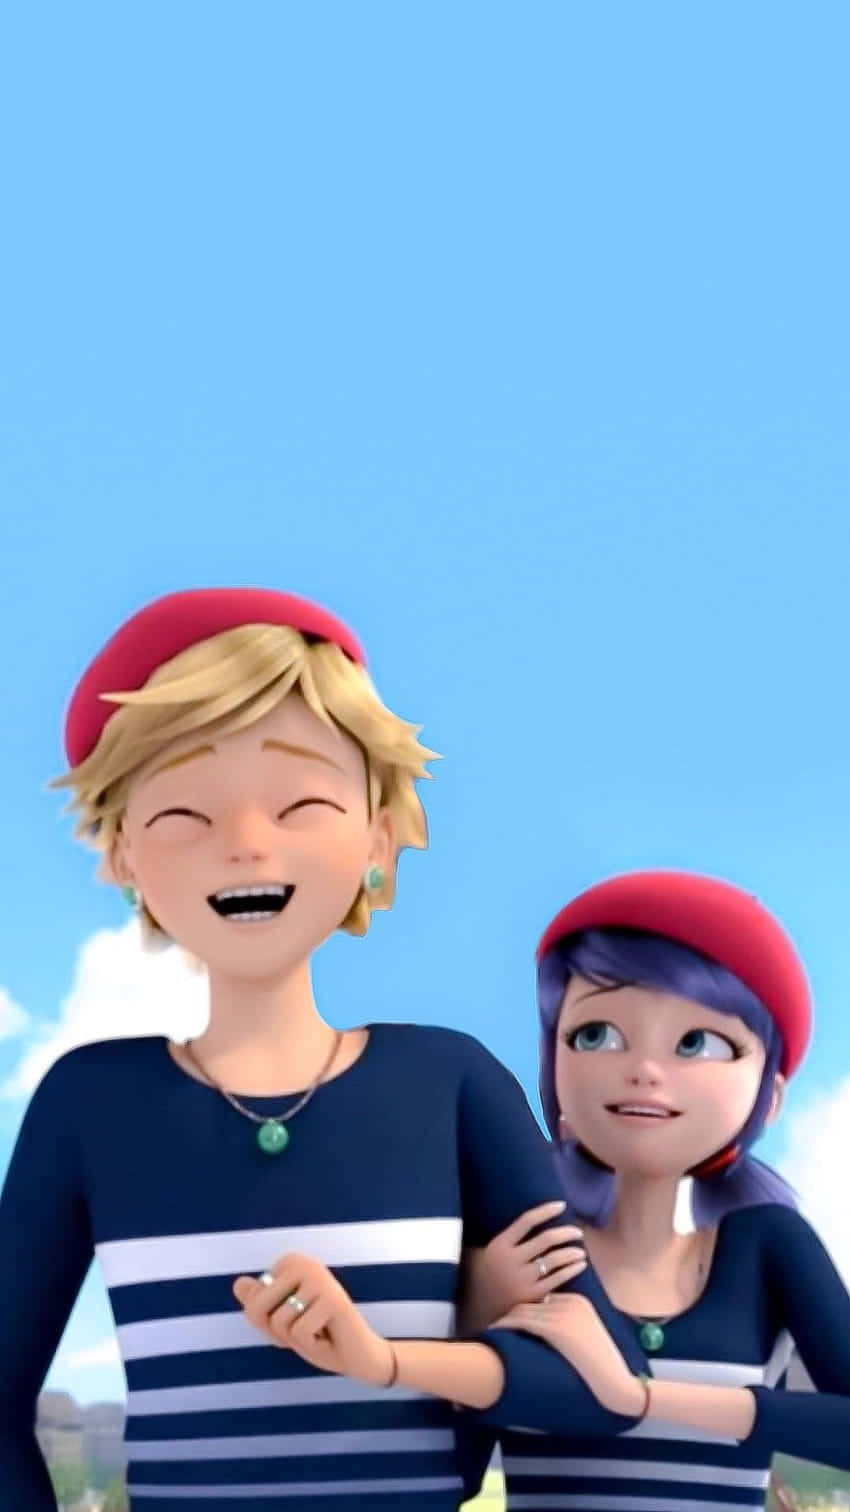 A Cartoon Couple In A Red Shirt And A Red Hat Wallpaper